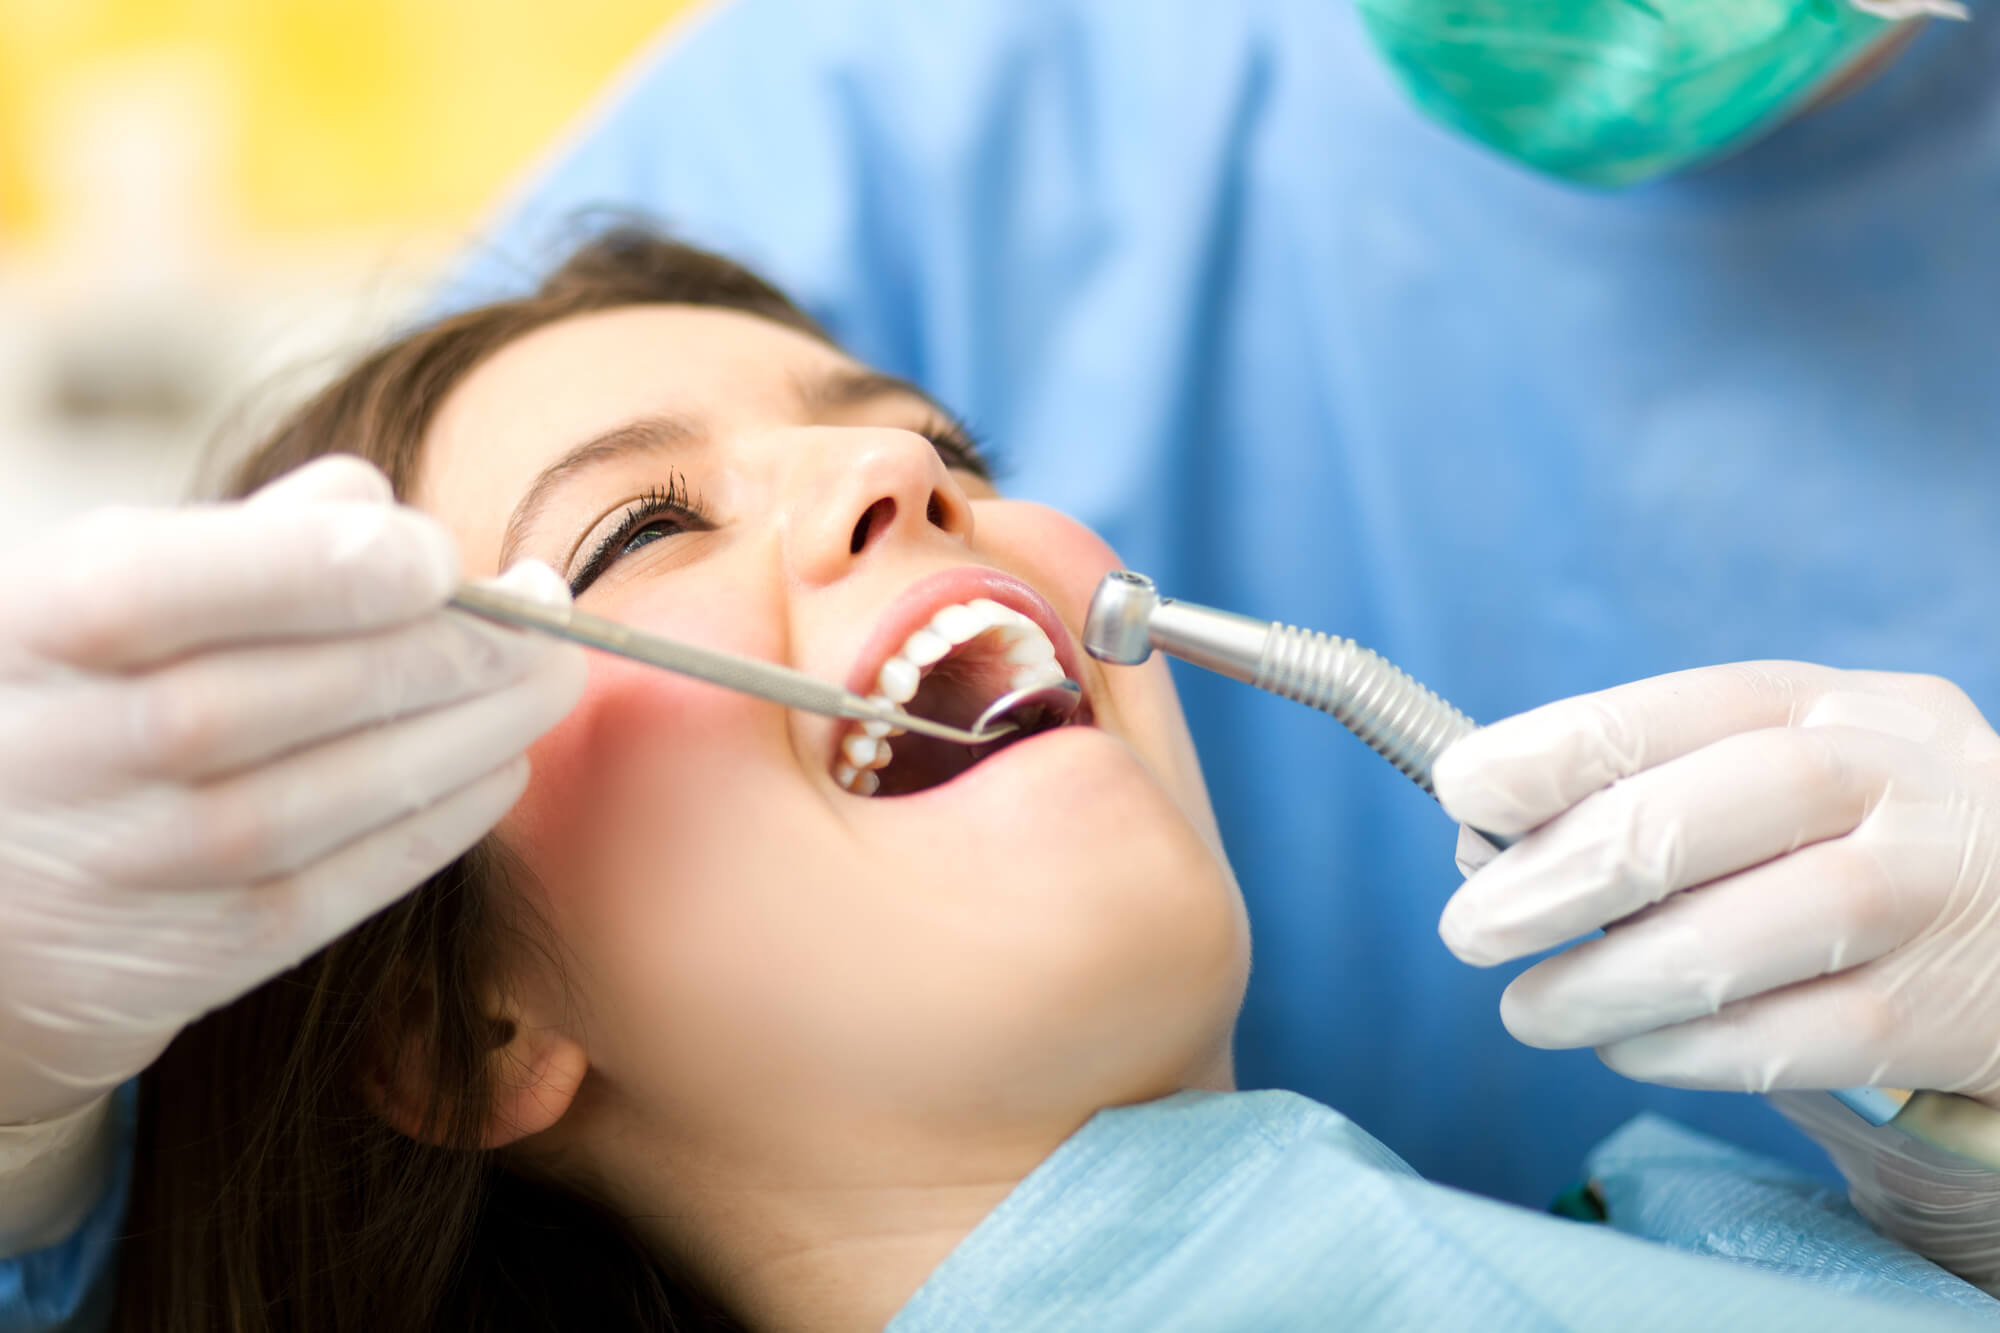 who offers the best tamiami dentist?